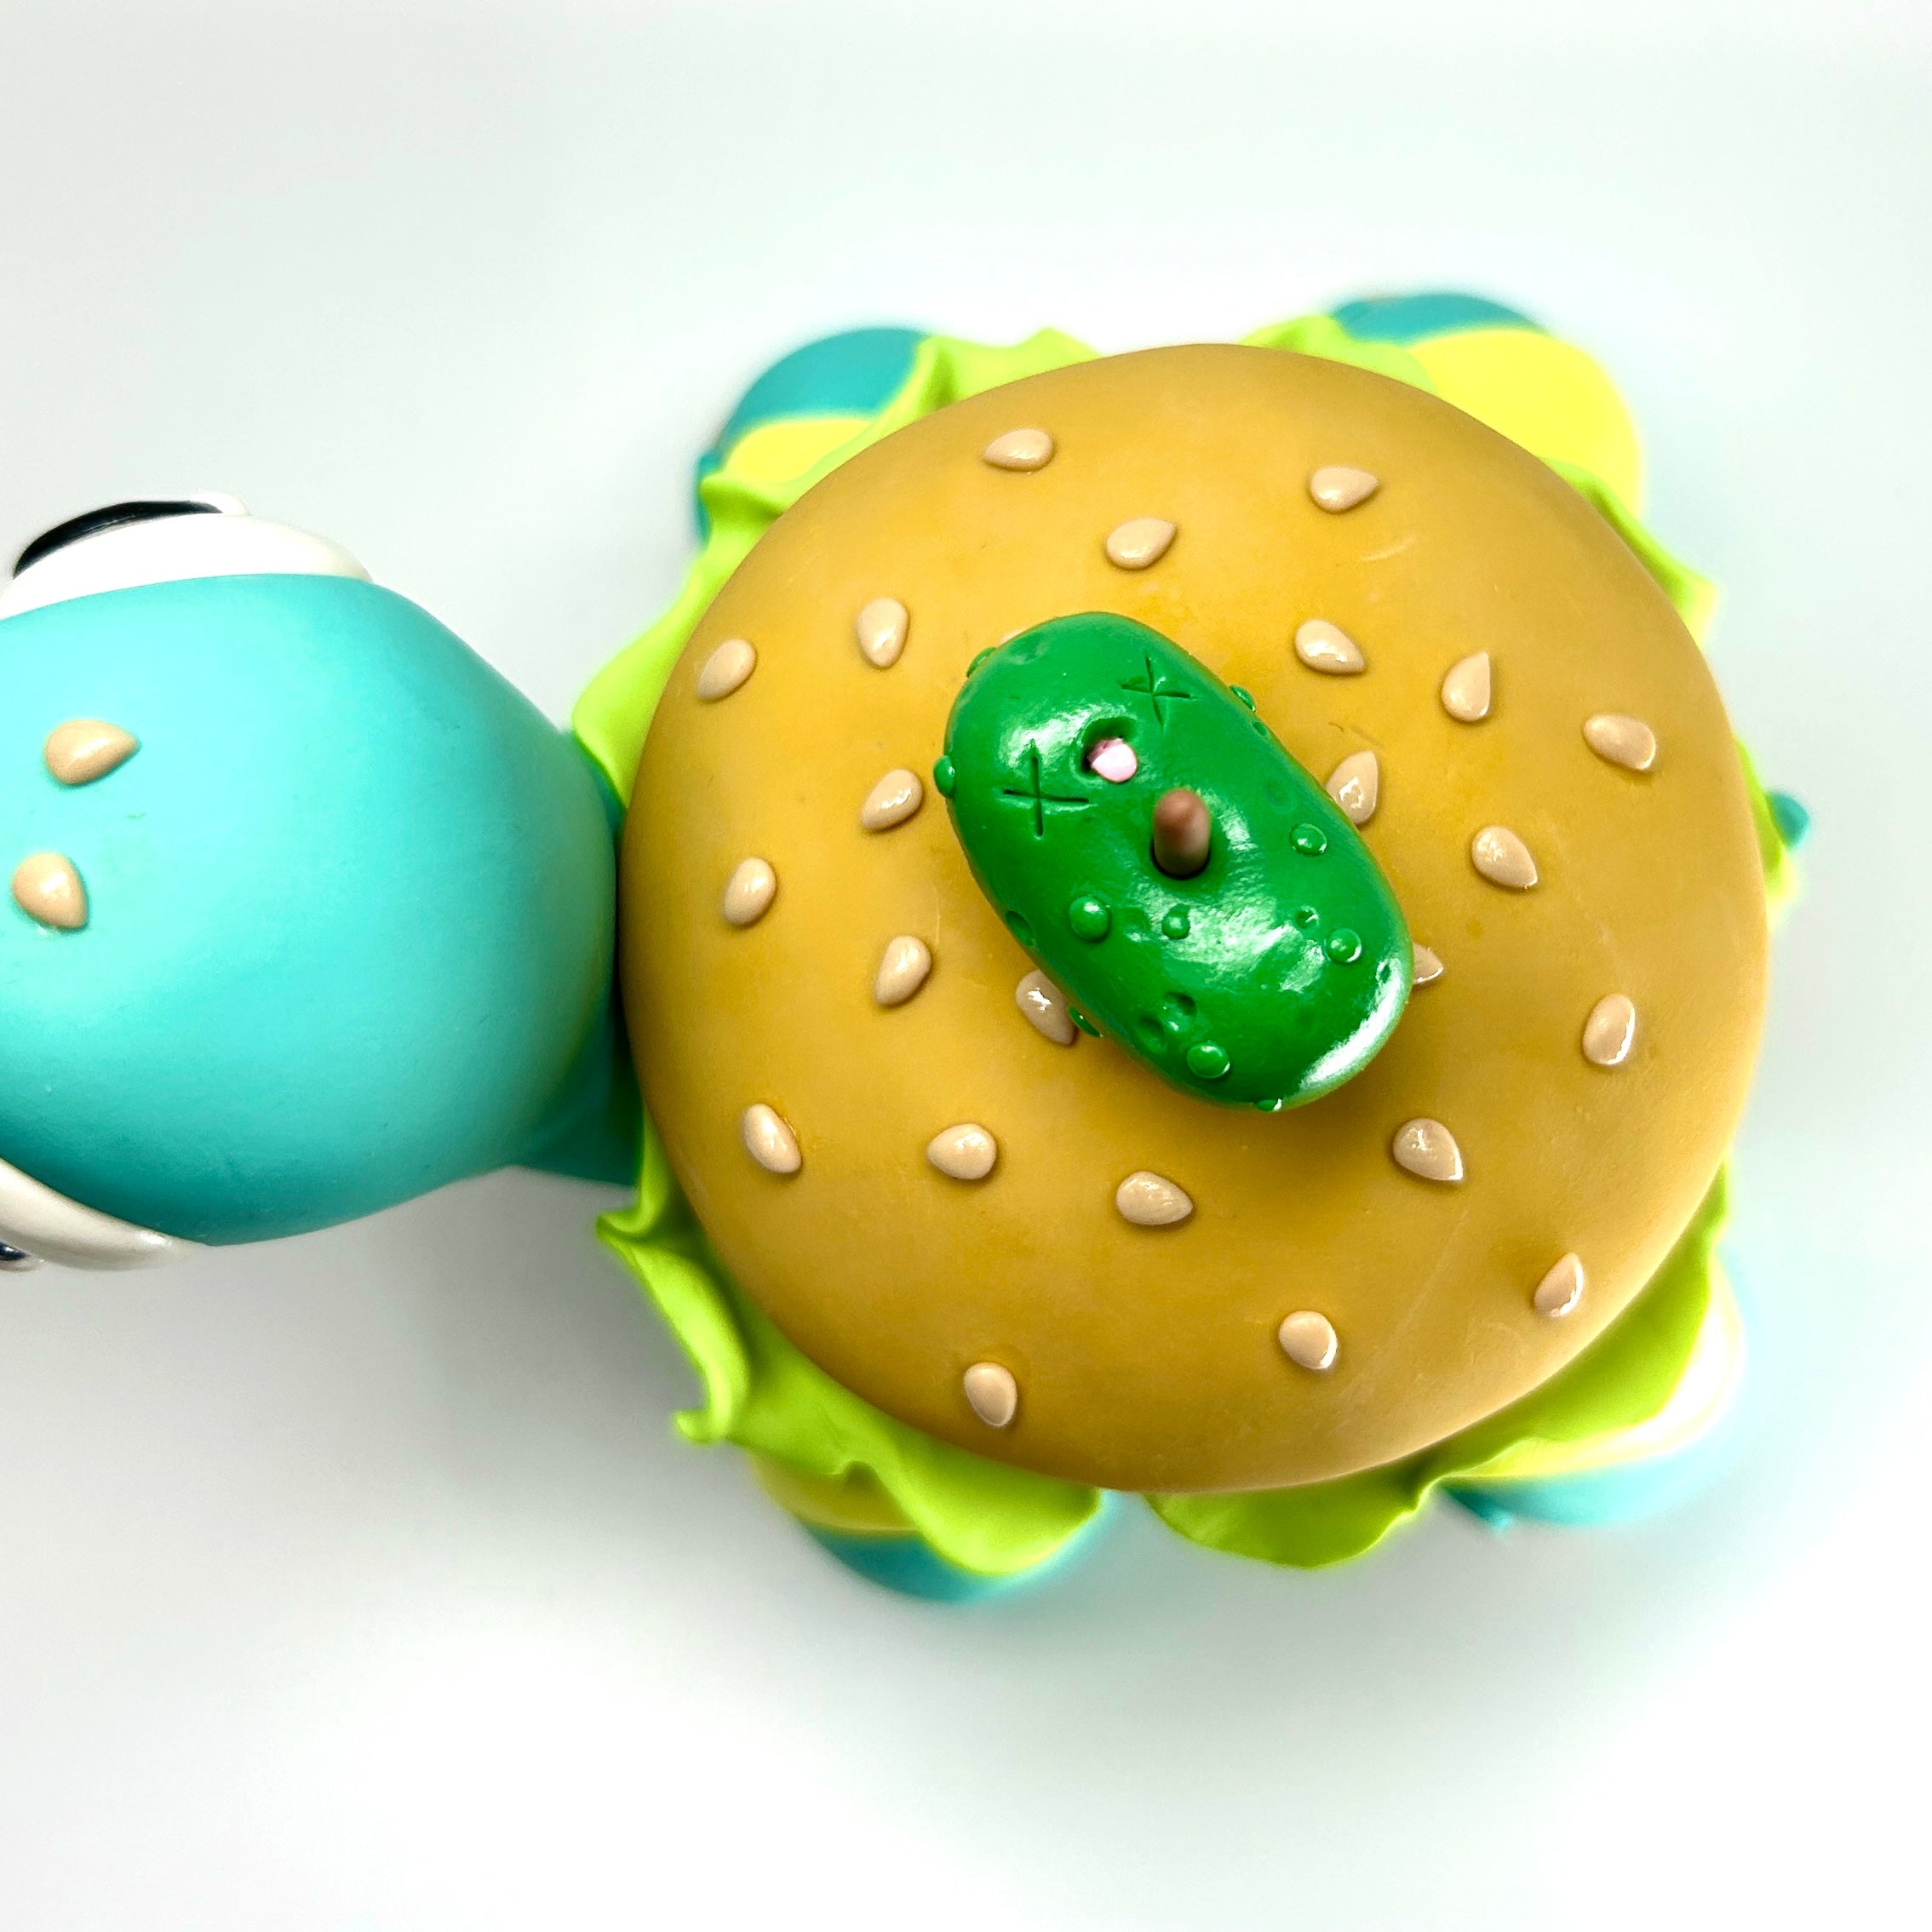 Toy turtle with a burger and pickle, part of Simon Says Macy & Friends - Turtleburger - Pastel Goth Remix.